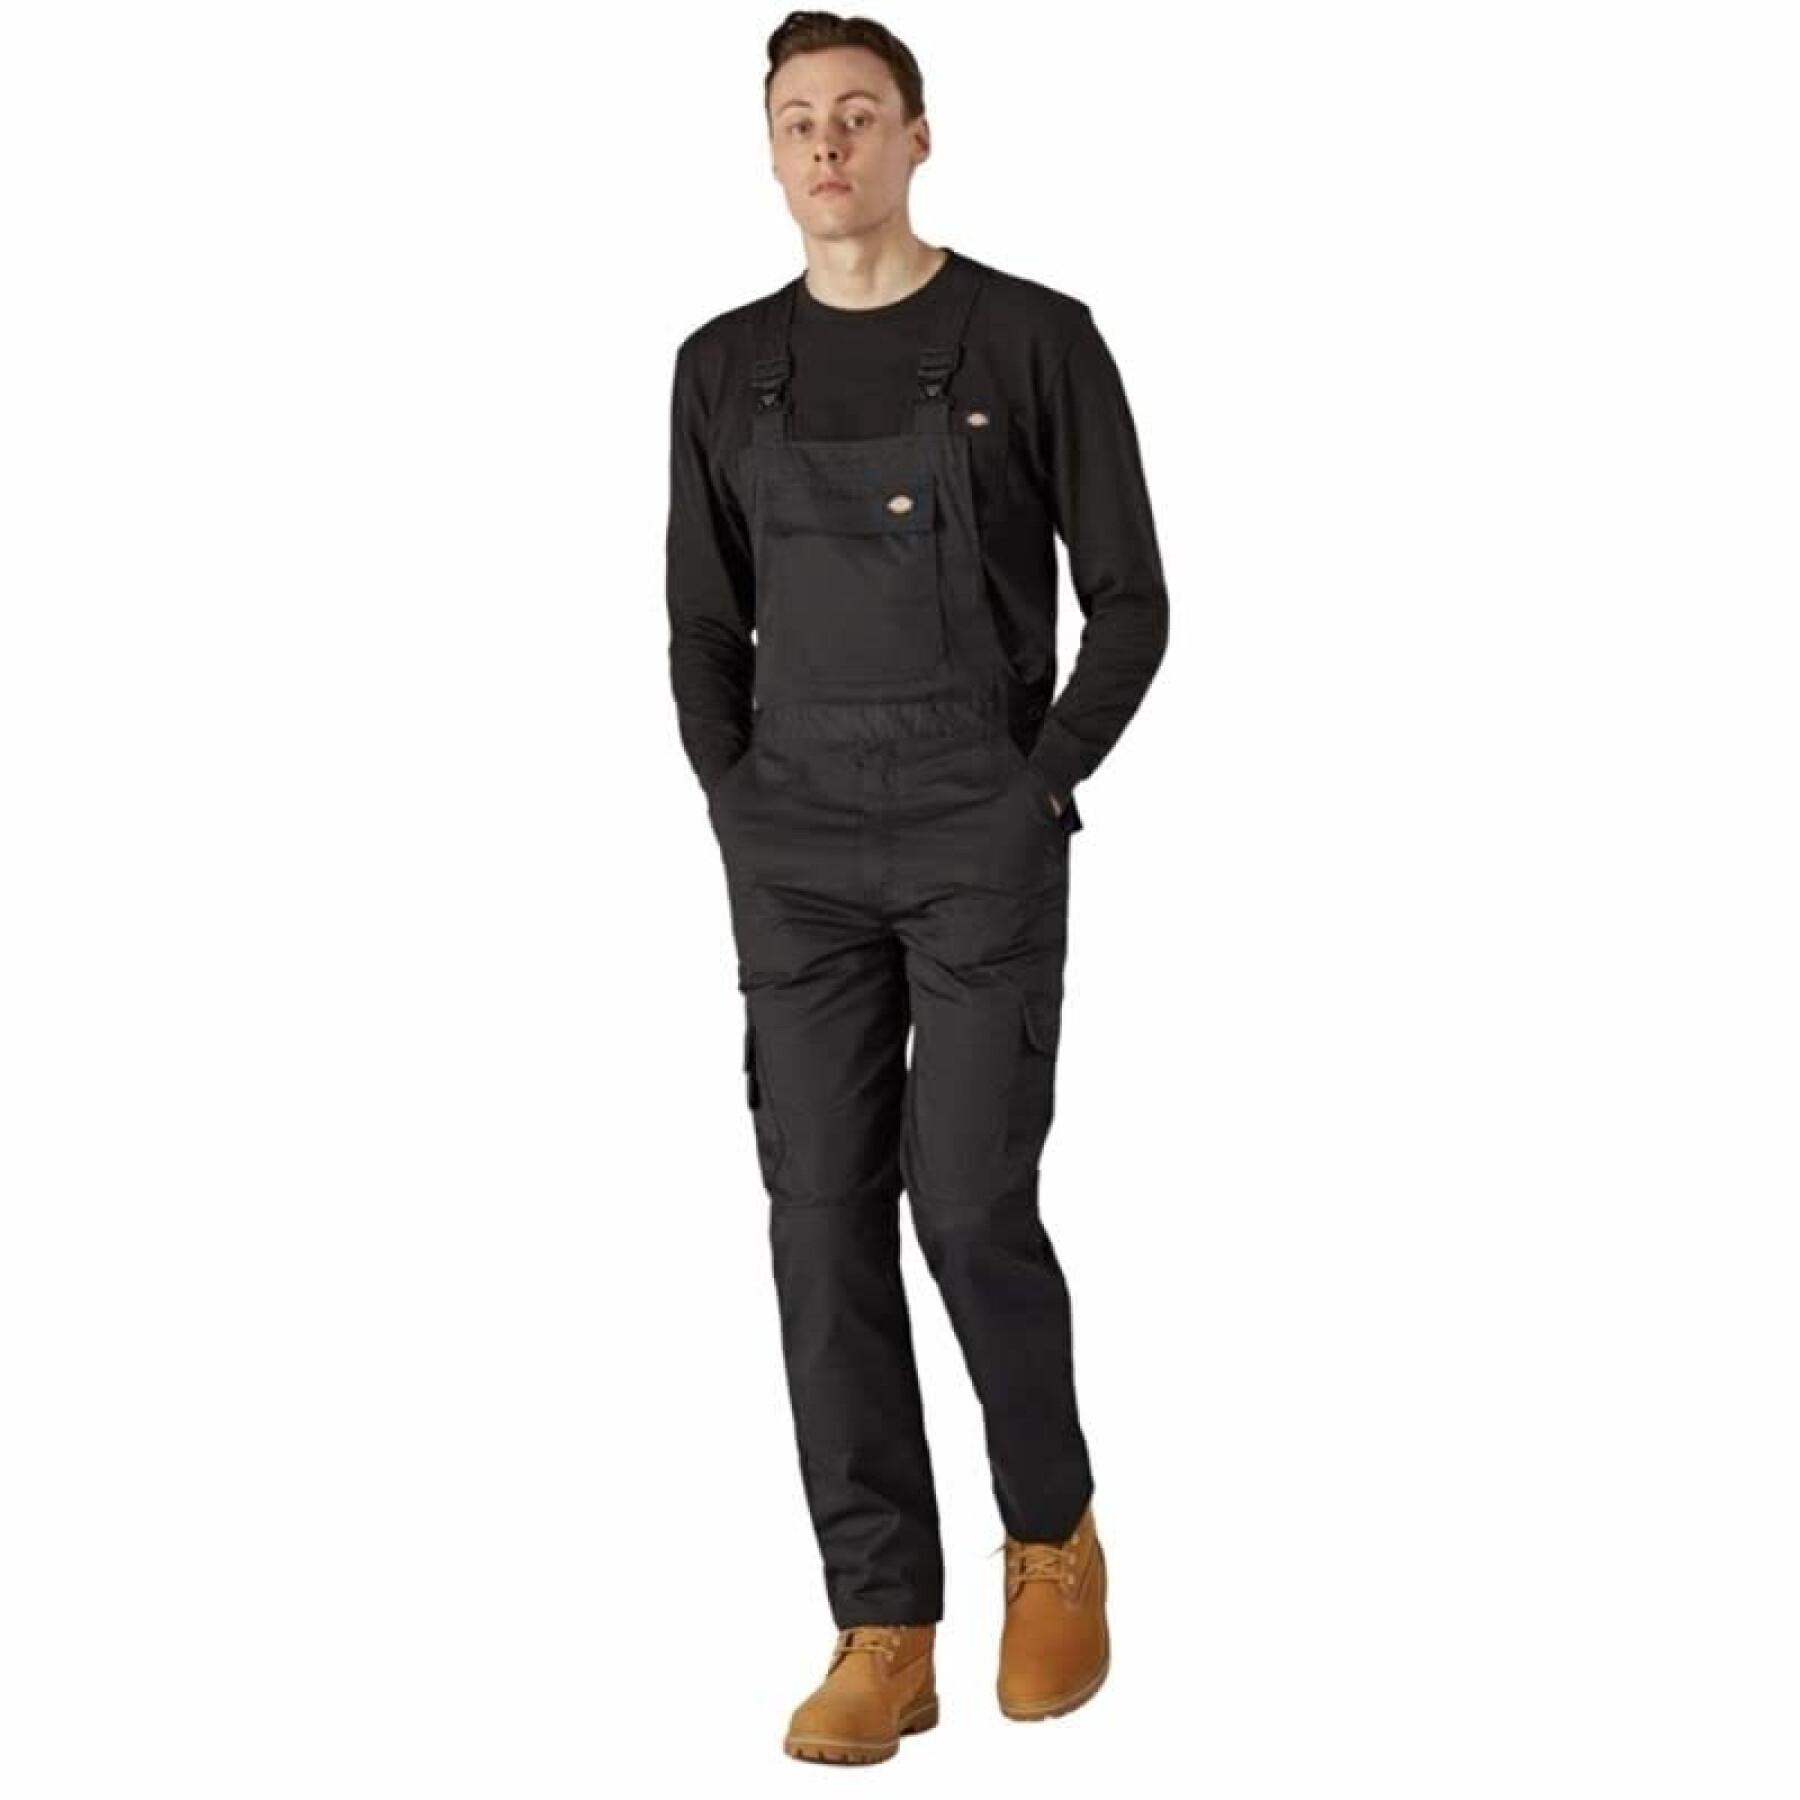 Overalls Dickies EVeryday EX. DED247BB